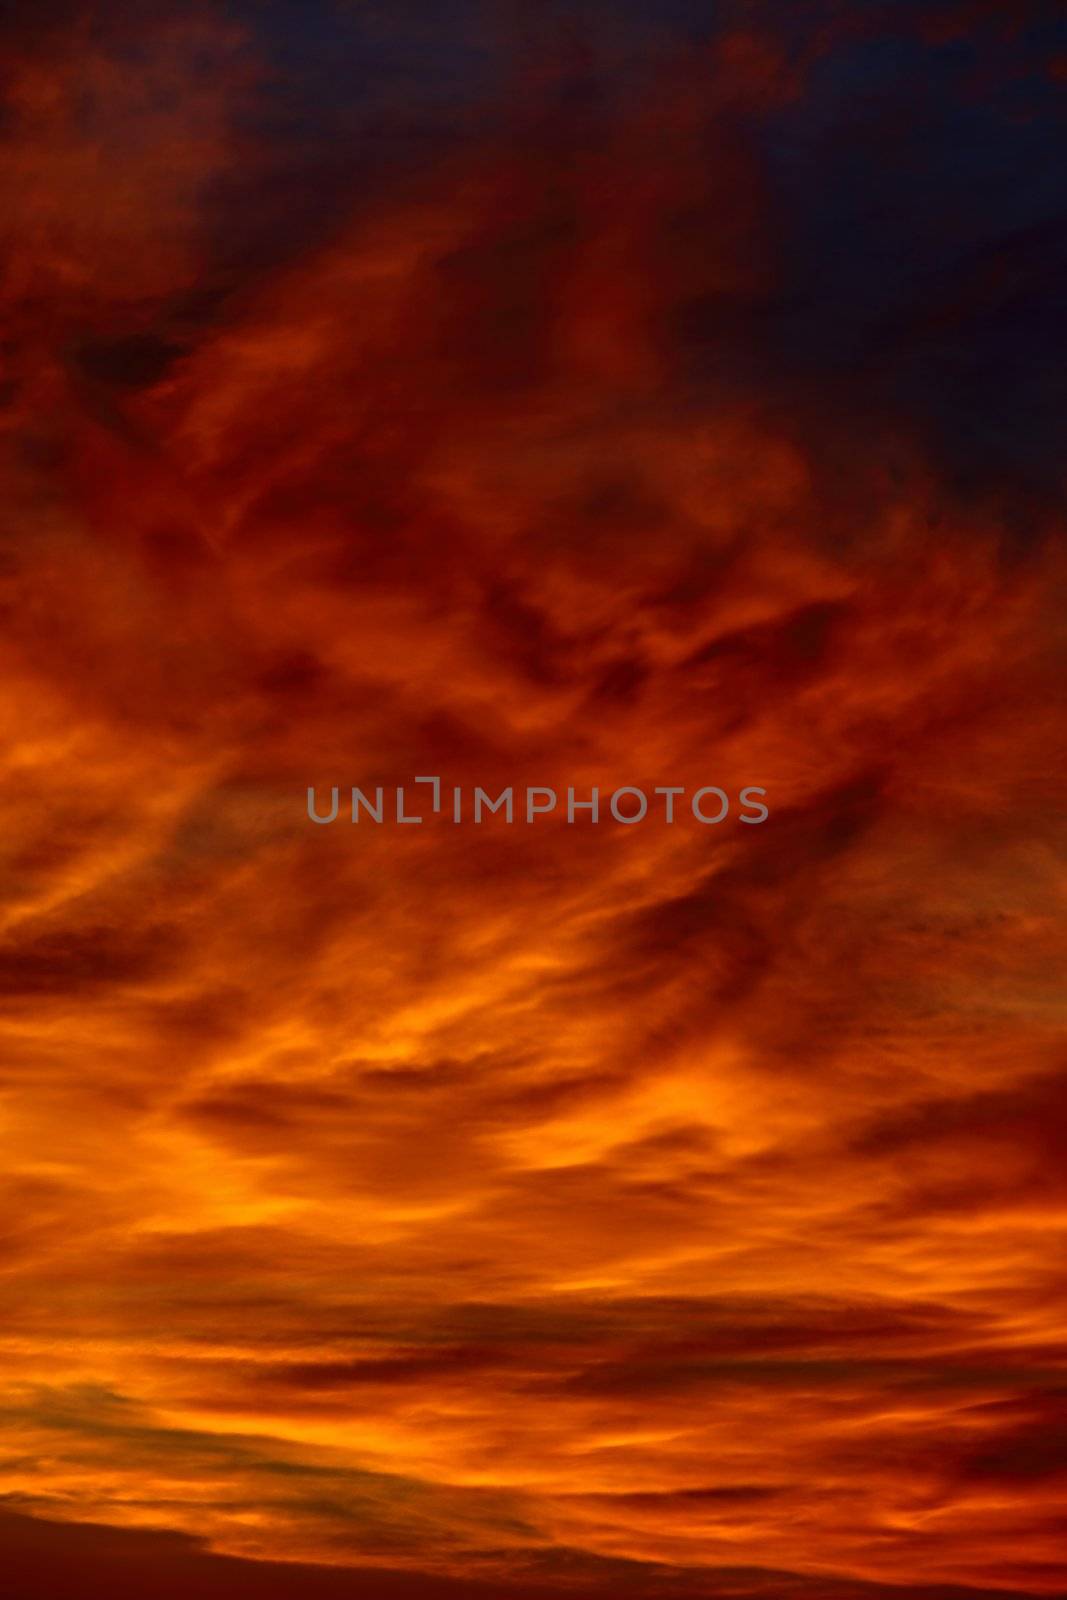 Dramatic sunset sky with clouds glowing red